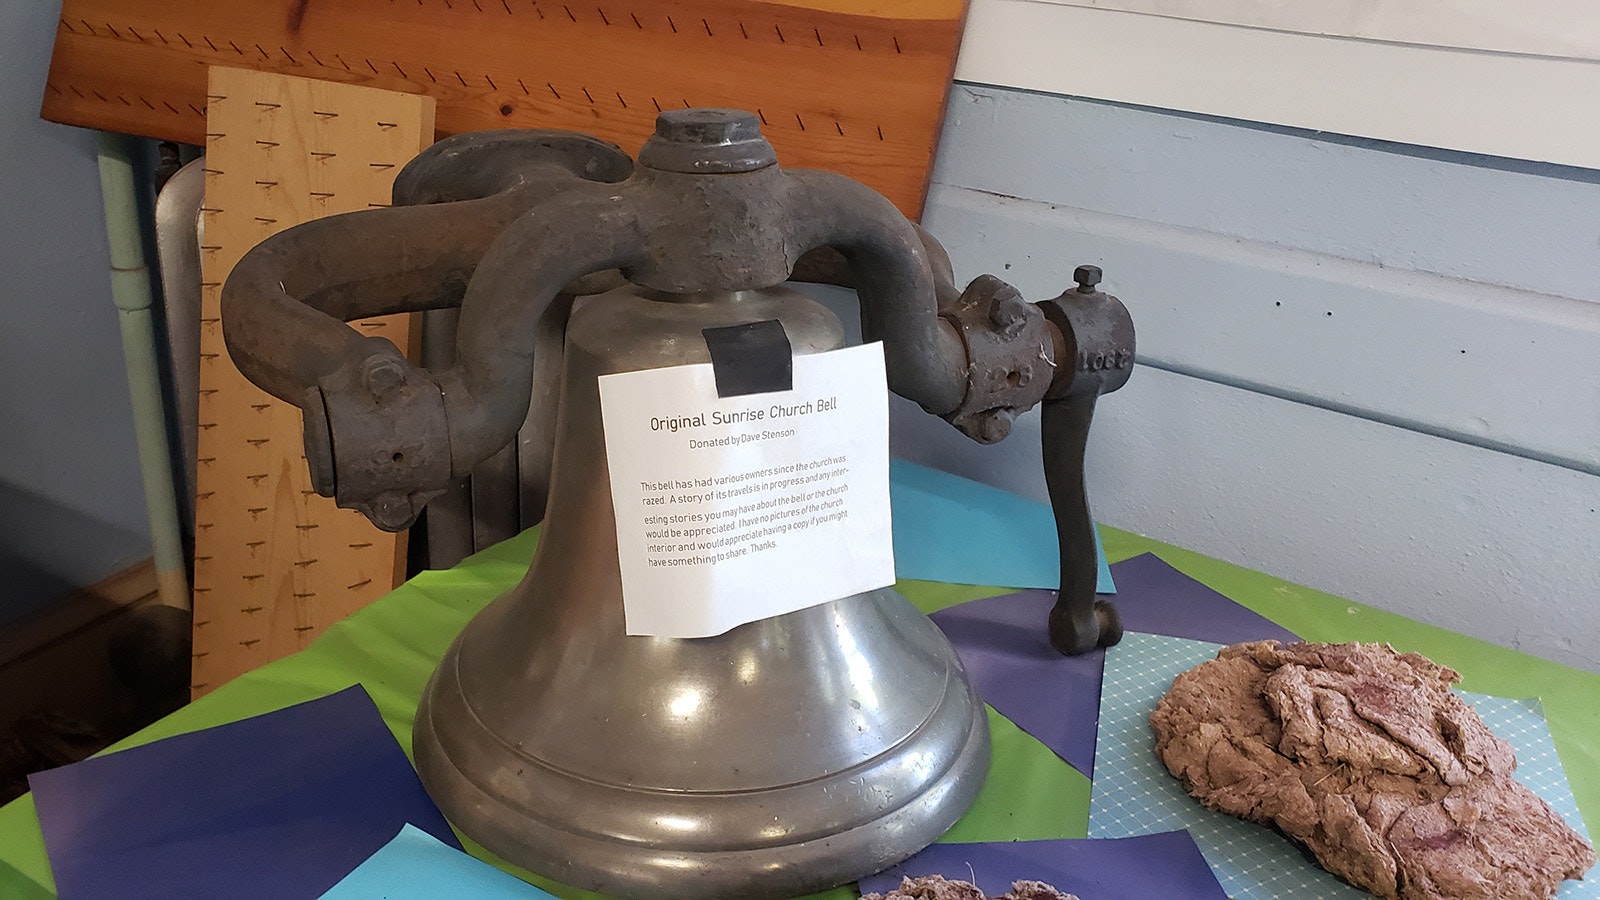 The bell from the church in Sunrise is on display.